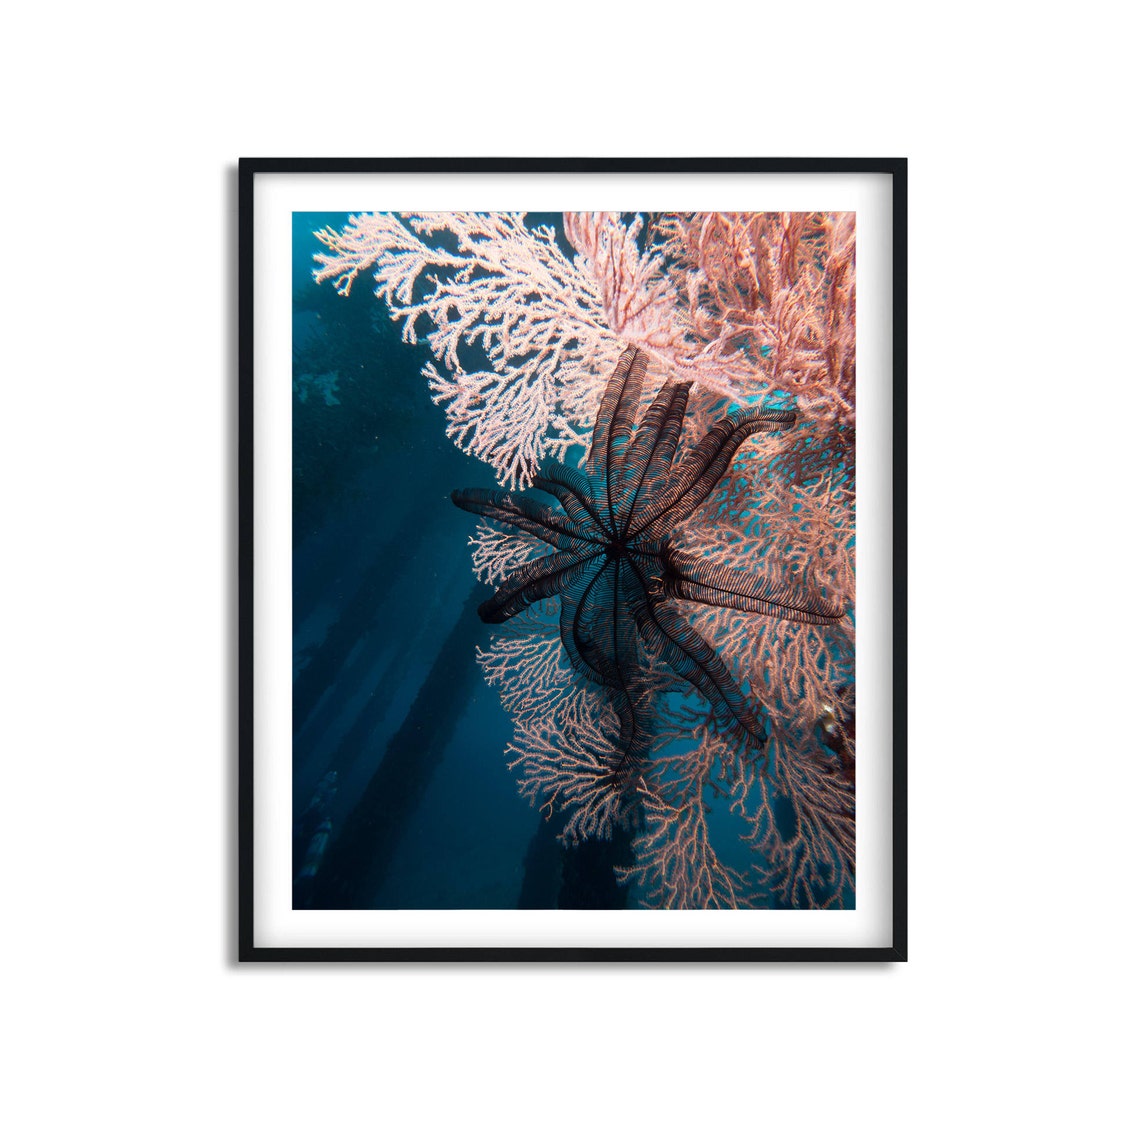 Crinoid and Coral Underwater Photo Framed Art Print 8x10 - Etsy